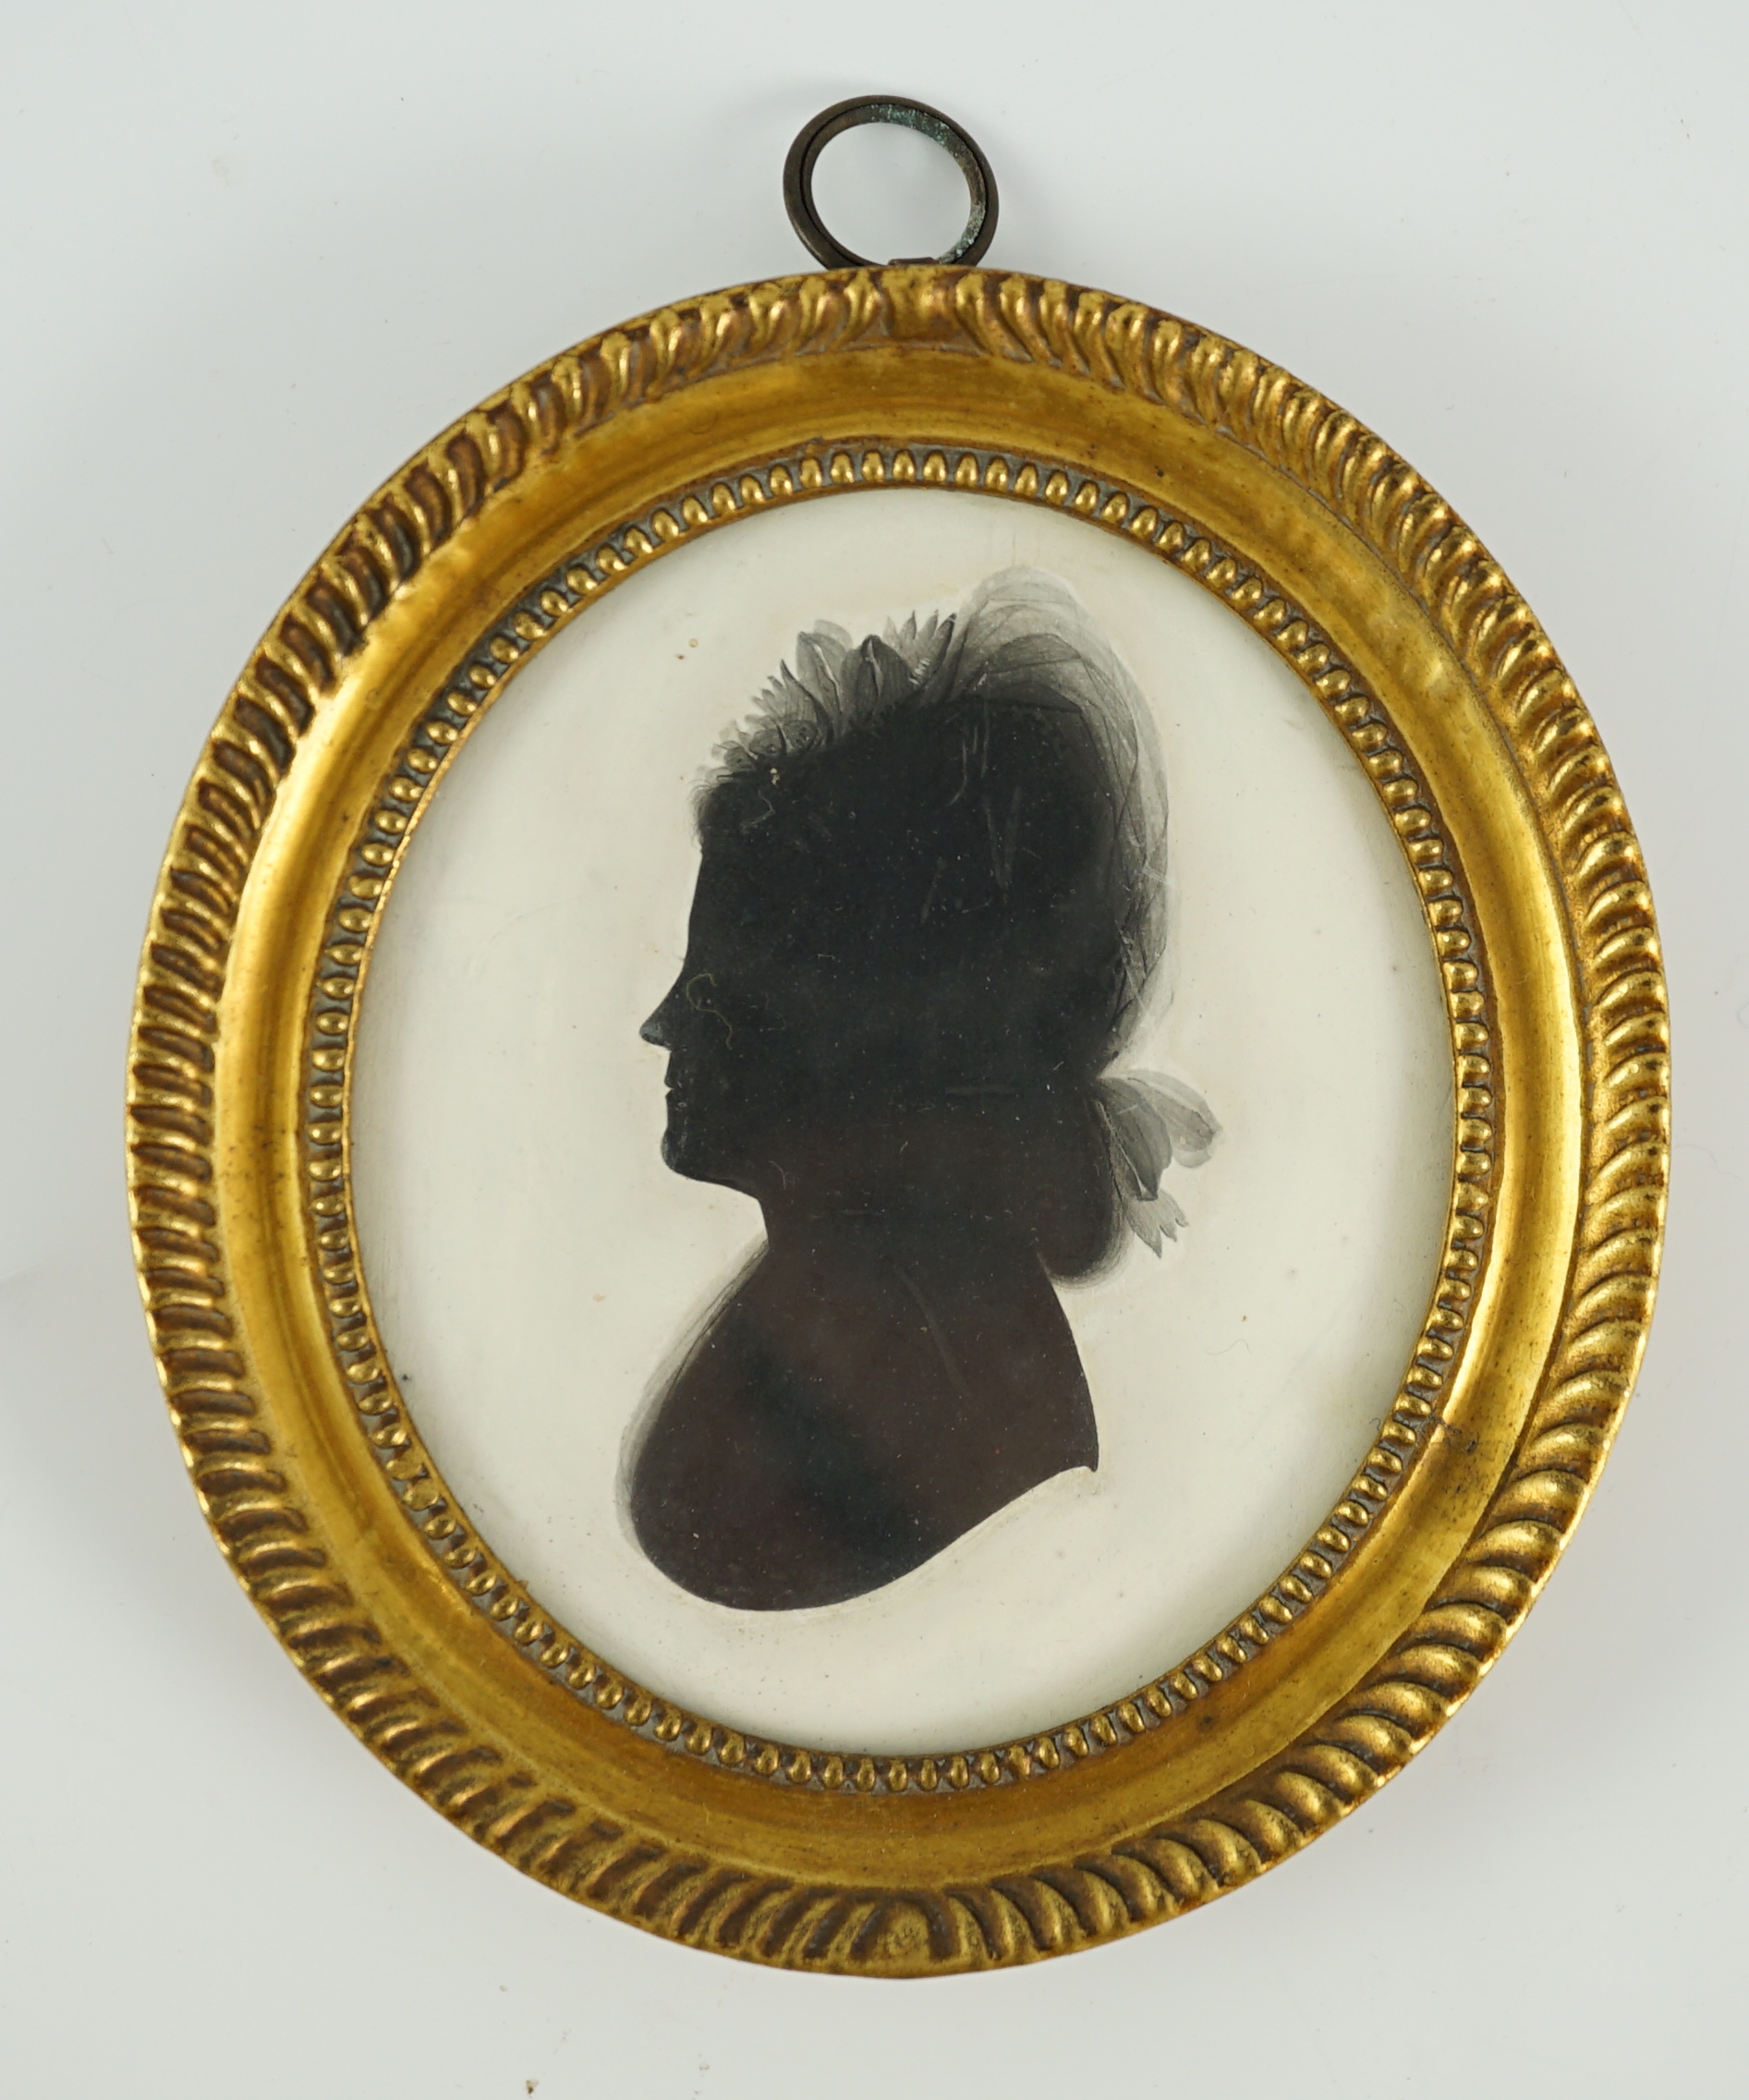 John Miers (1756-1821) and John Field (1772-1848), Silhouette of a lady, painted plaster, 7.5 x 6.5cm.